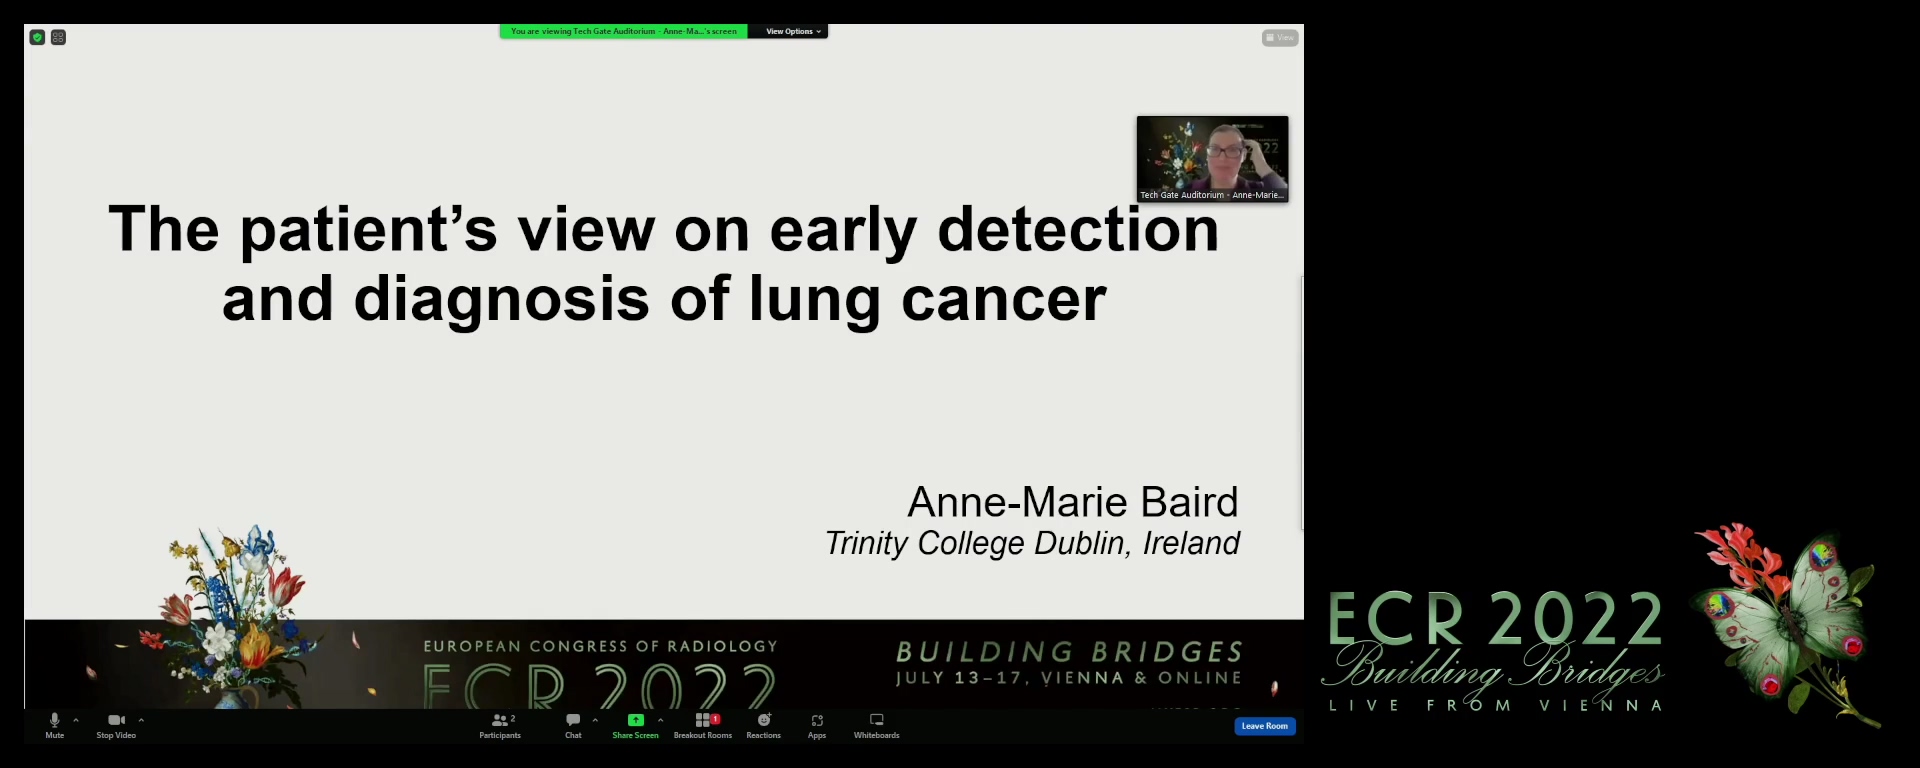 The patient's view on early detection and diagnosis of lung cancer - Anne-Marie Baird, Dublin / IE